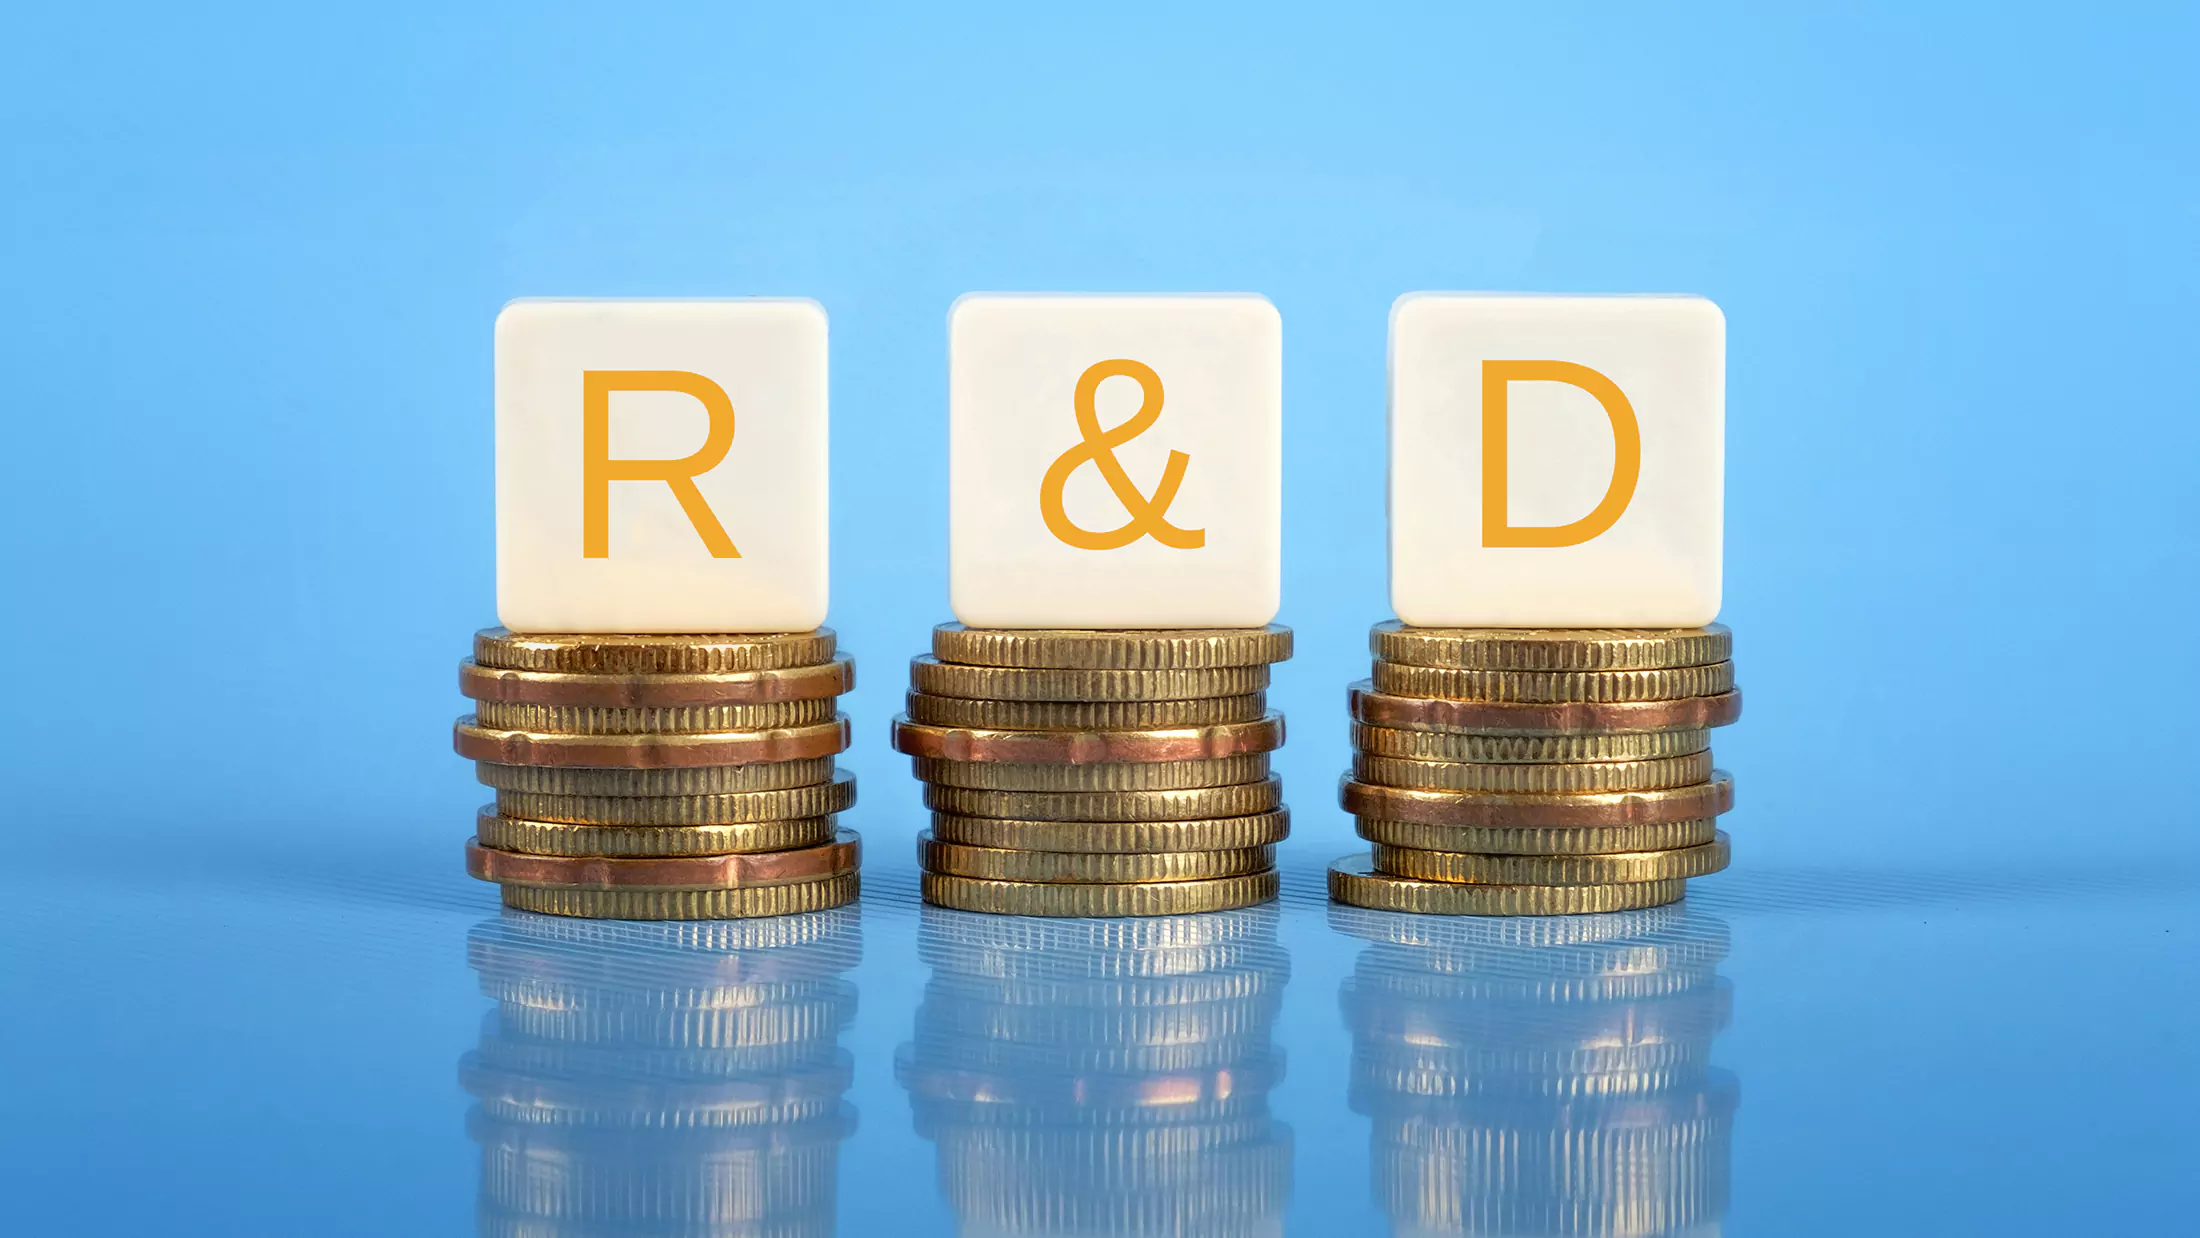 Letters for R ampersand D on three adjacent stacks of coins.